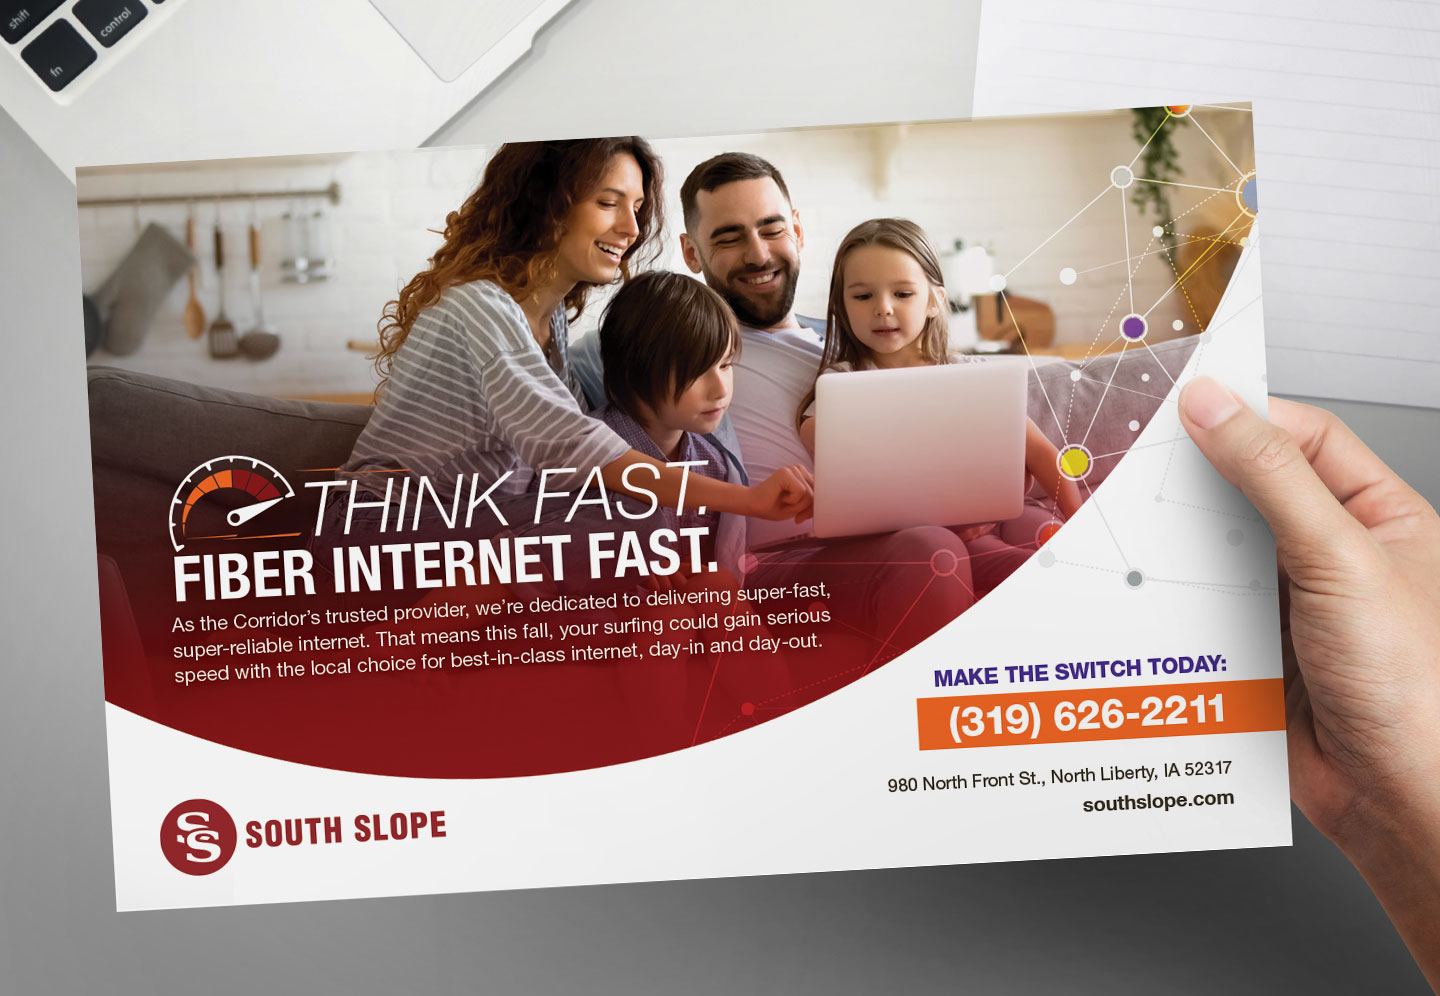 A South Slope ad that says "Think Fast. Fiber Internet Fast."